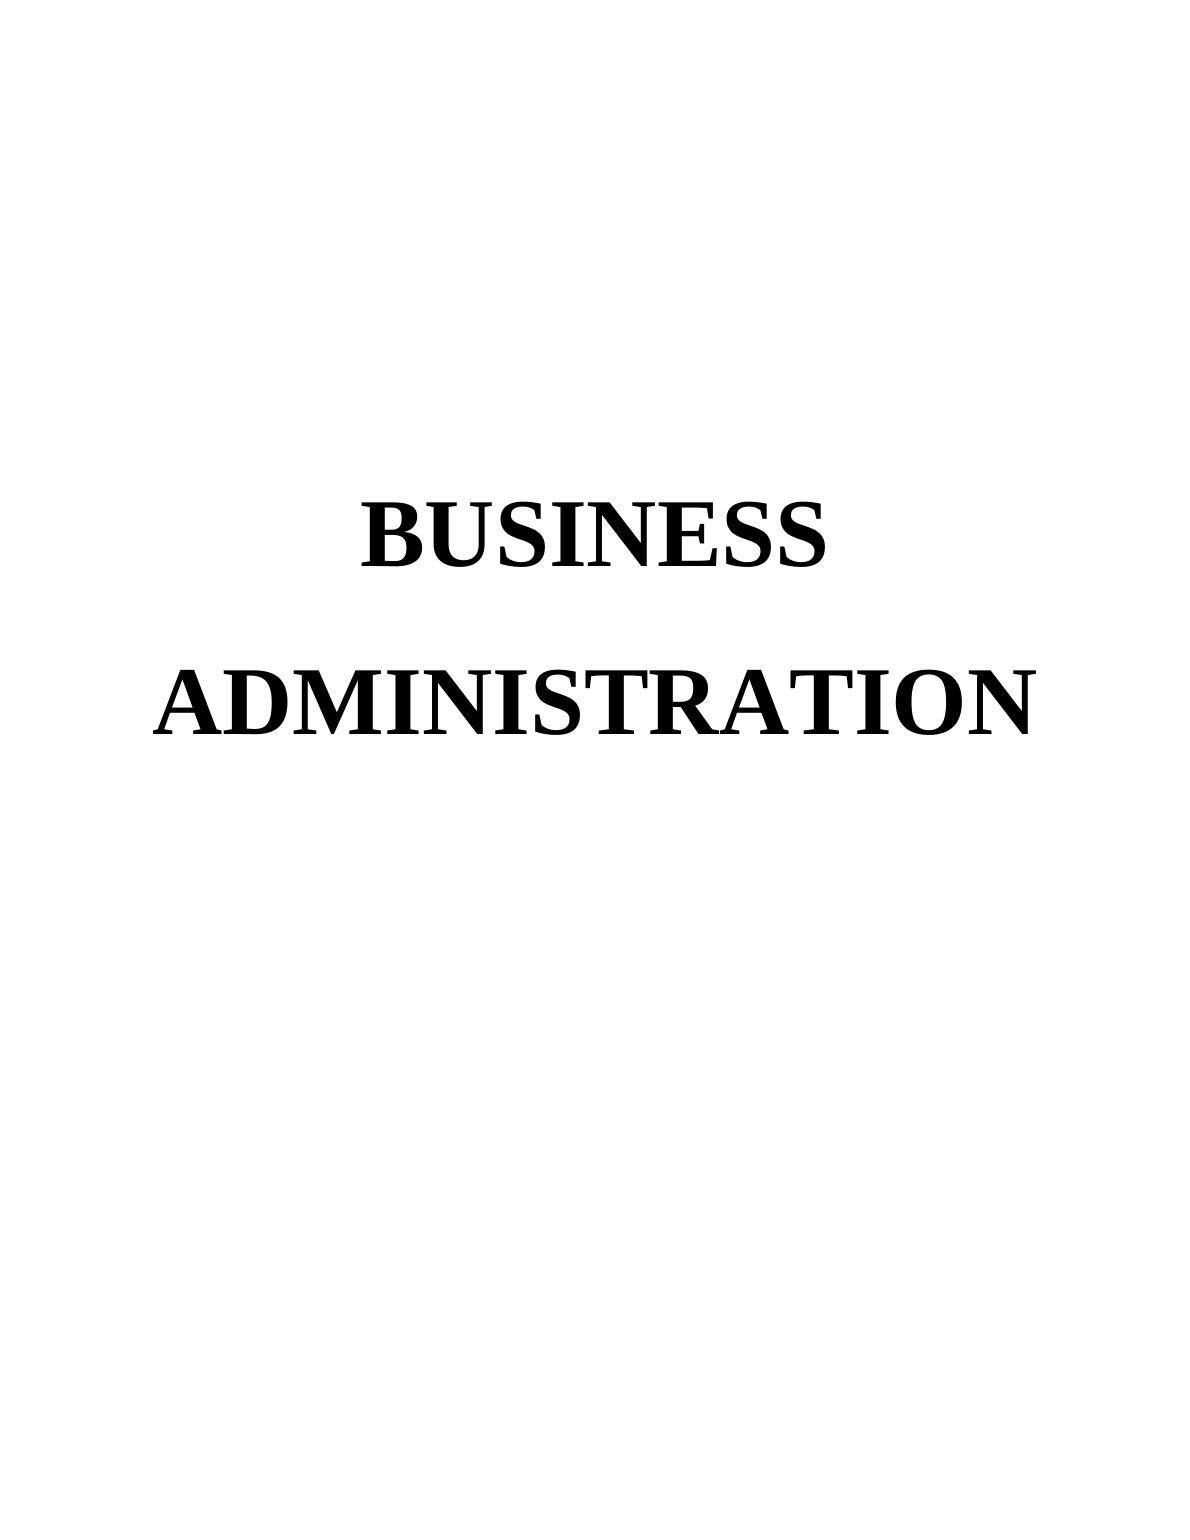 Business Administration Assignment Solved_1